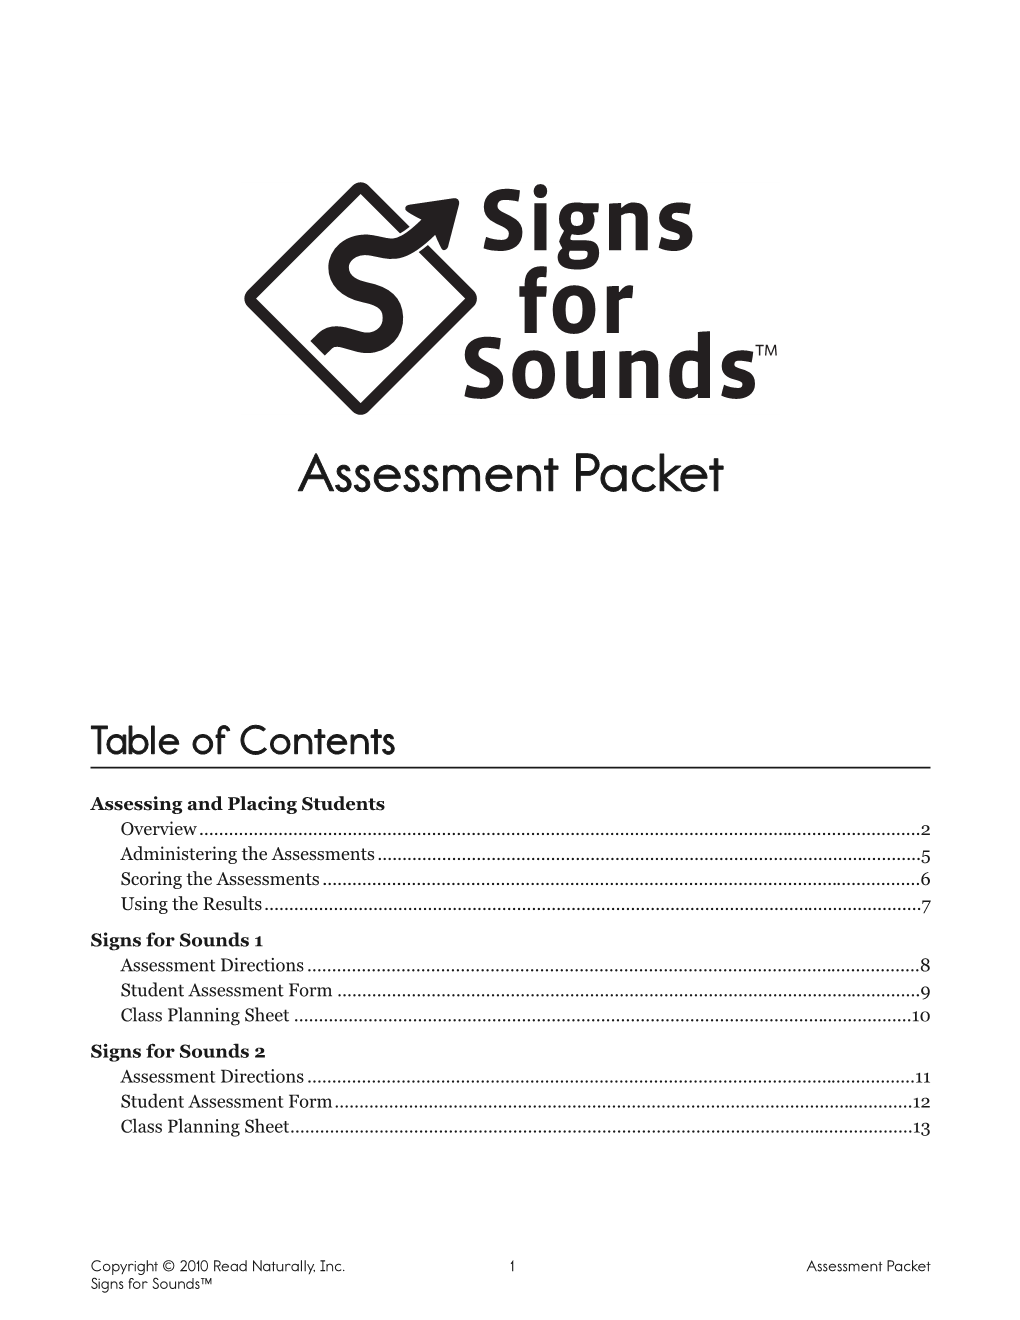 Signs For Sounds Assessment Packet Levels 1 2 